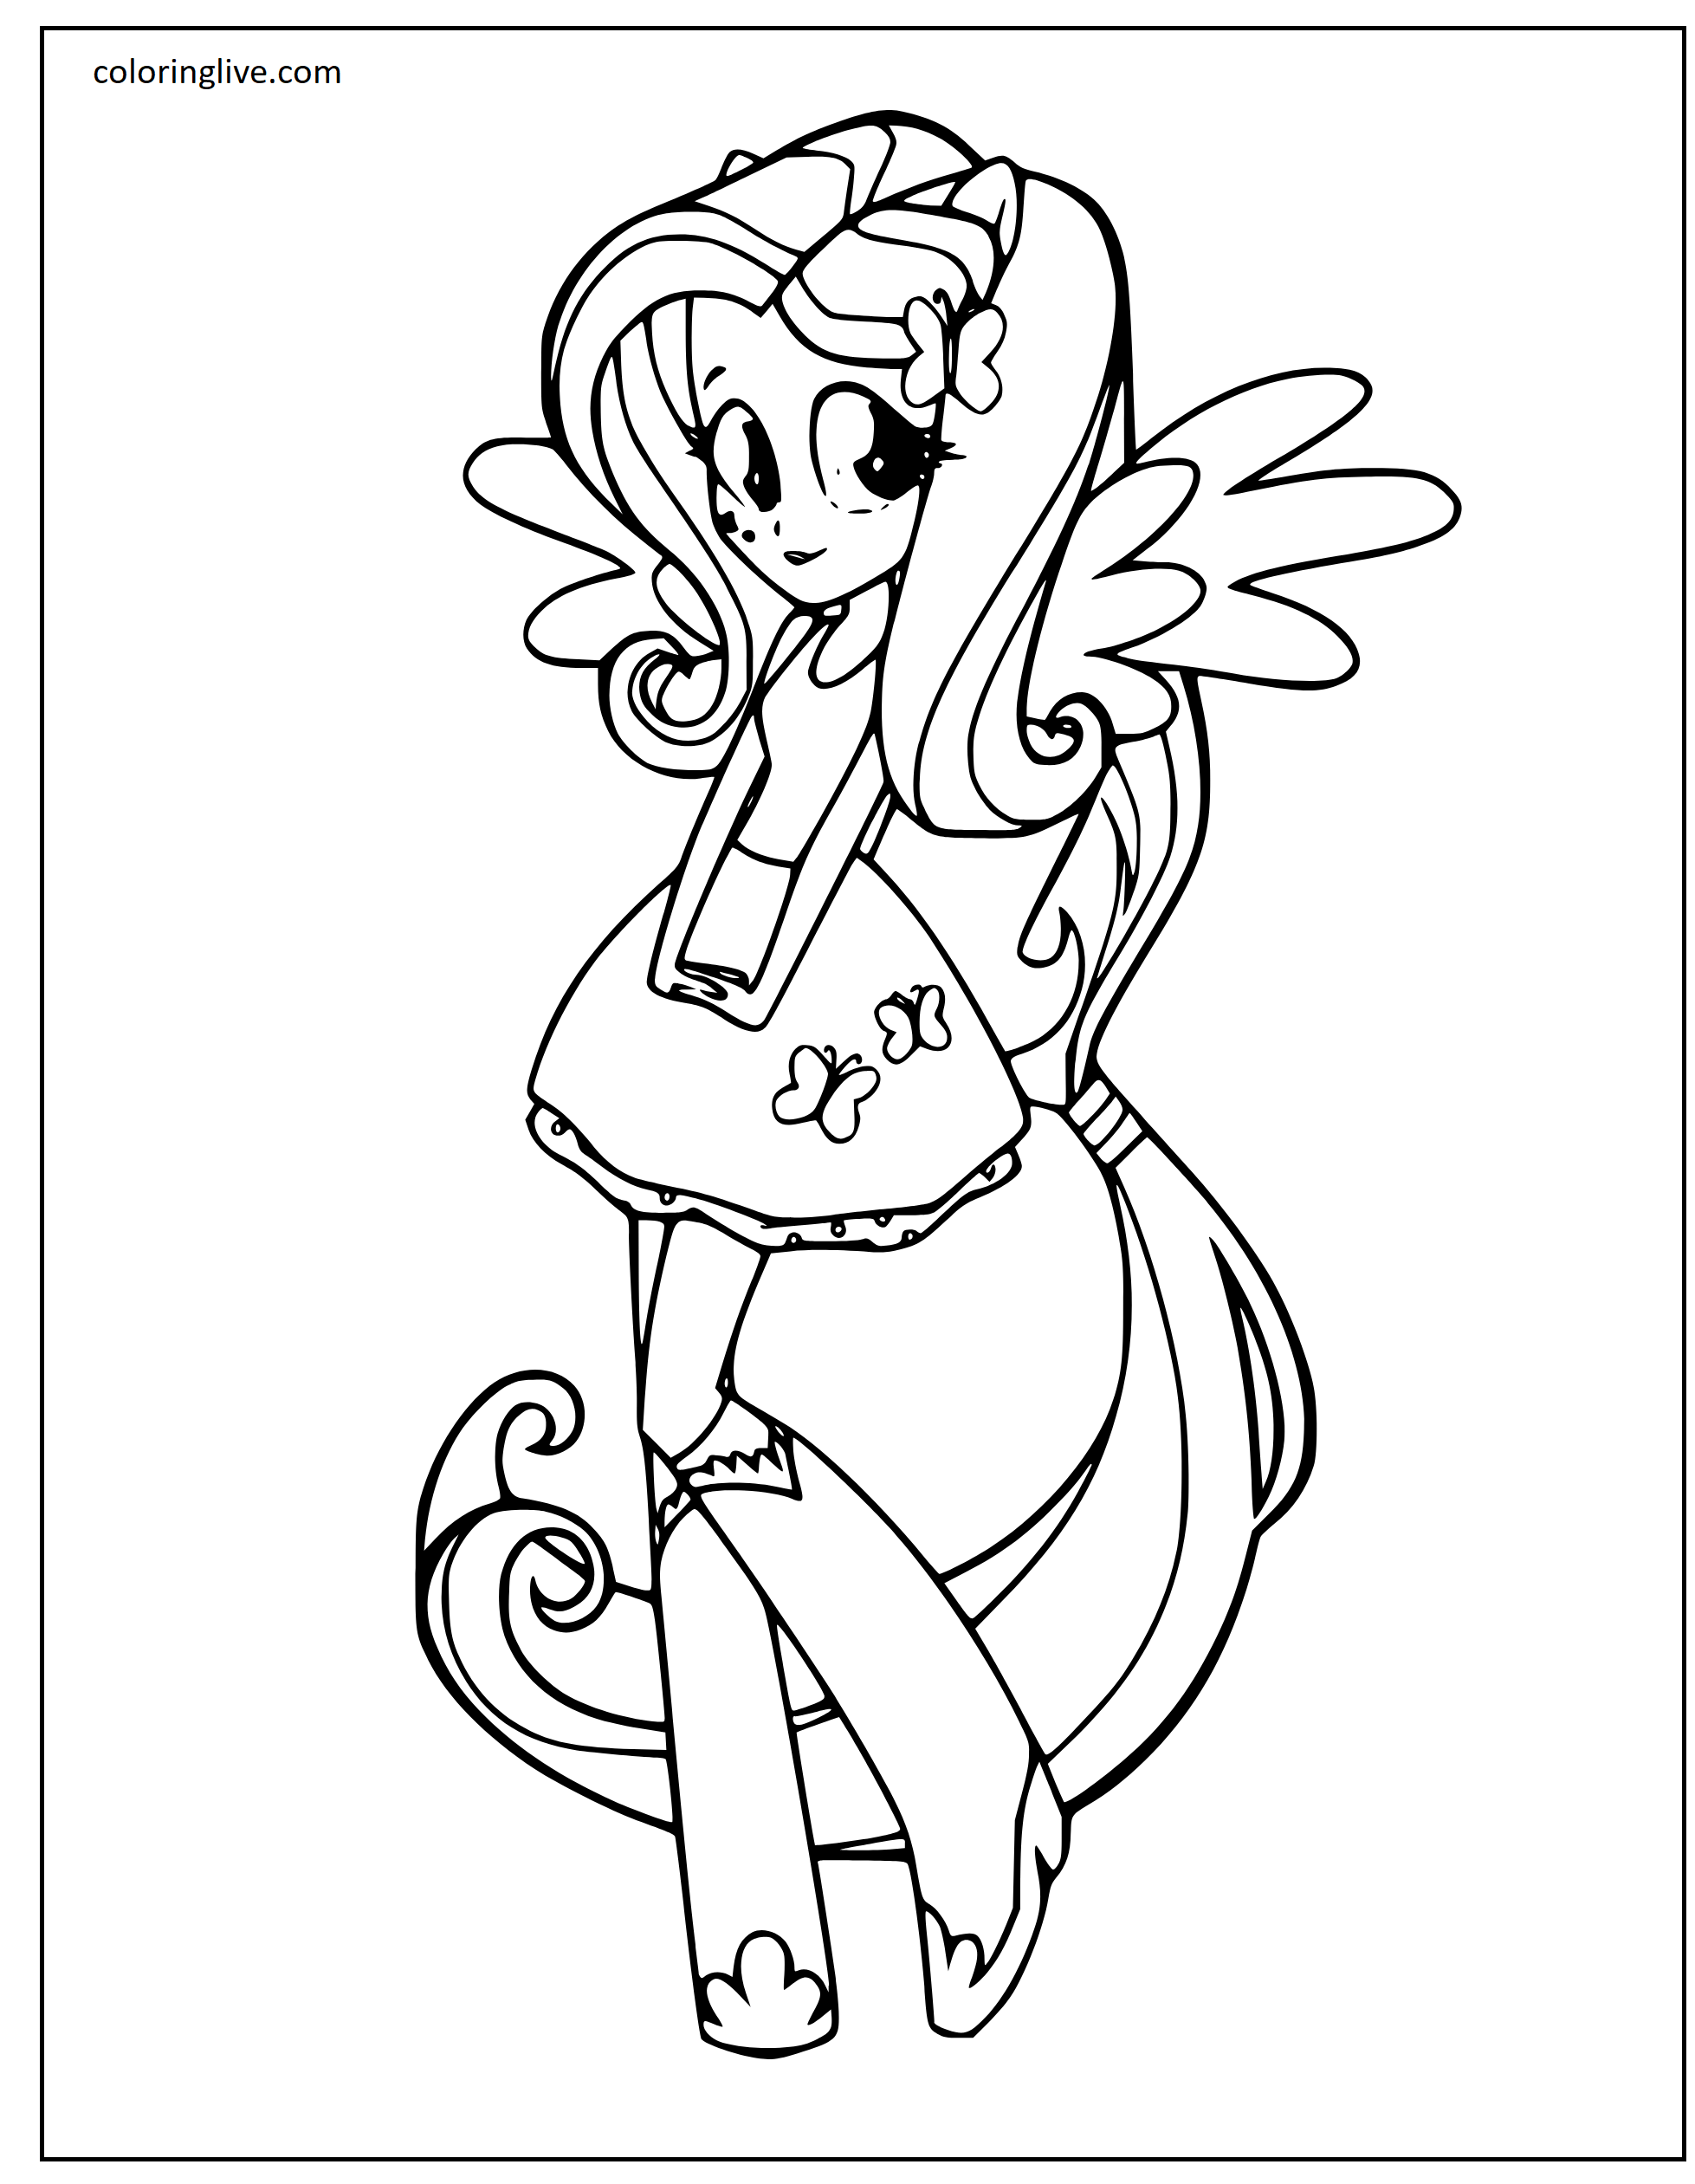 Printable Fluttershy Coloring Page for kids.